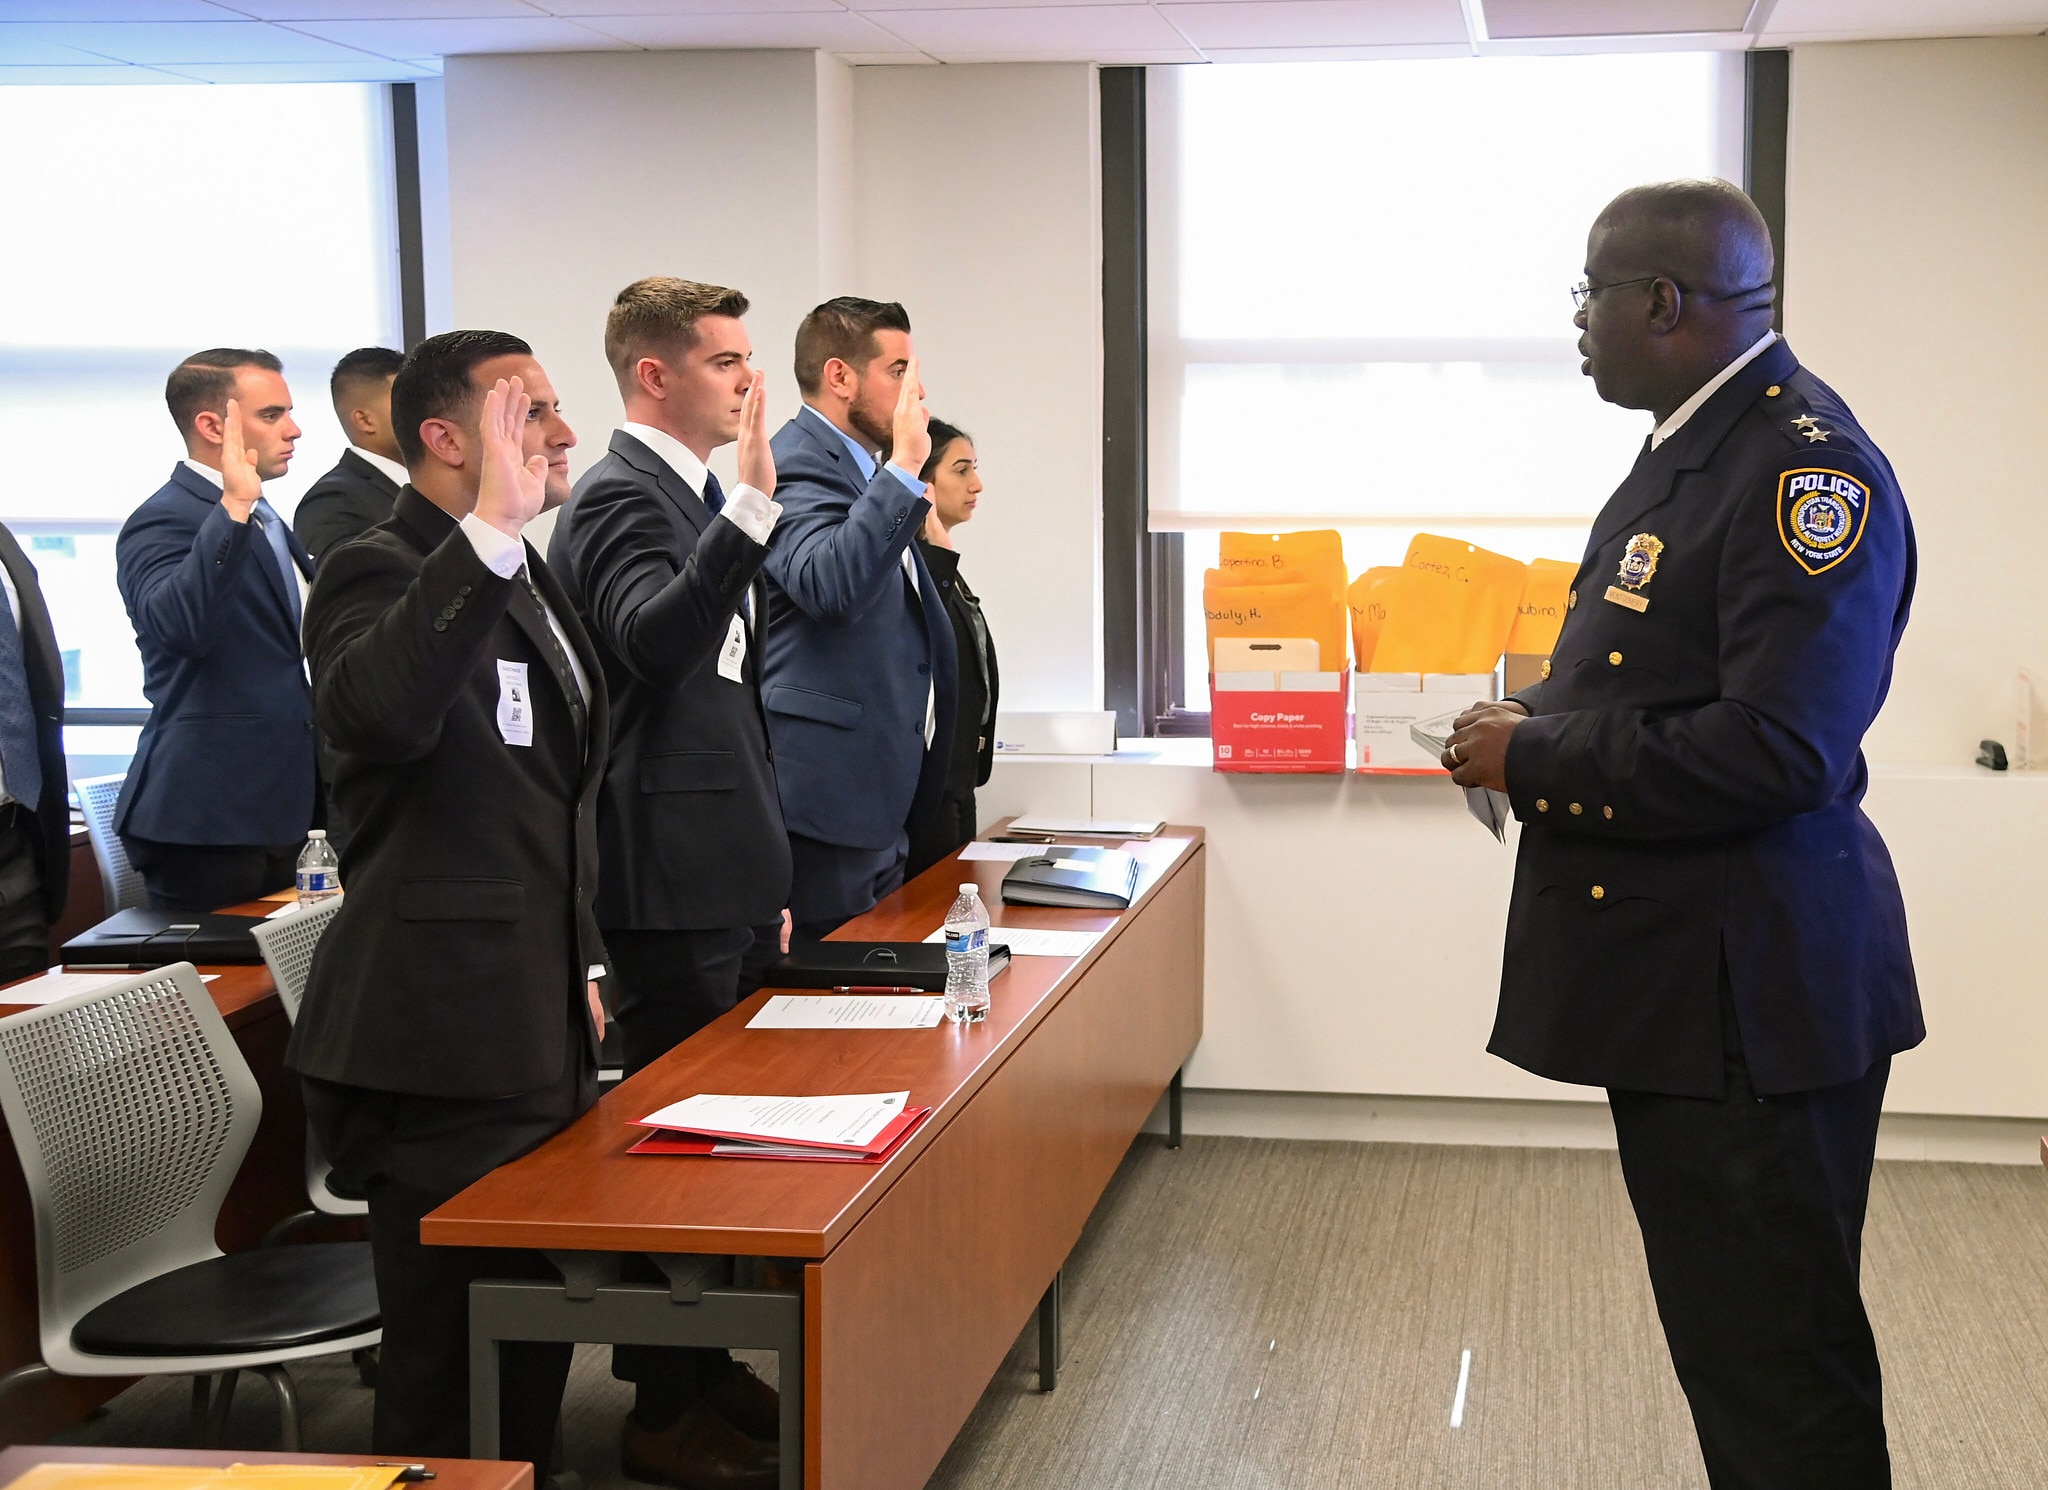 PHOTOS: MTA Police Department Welcomes 46 New Recruits